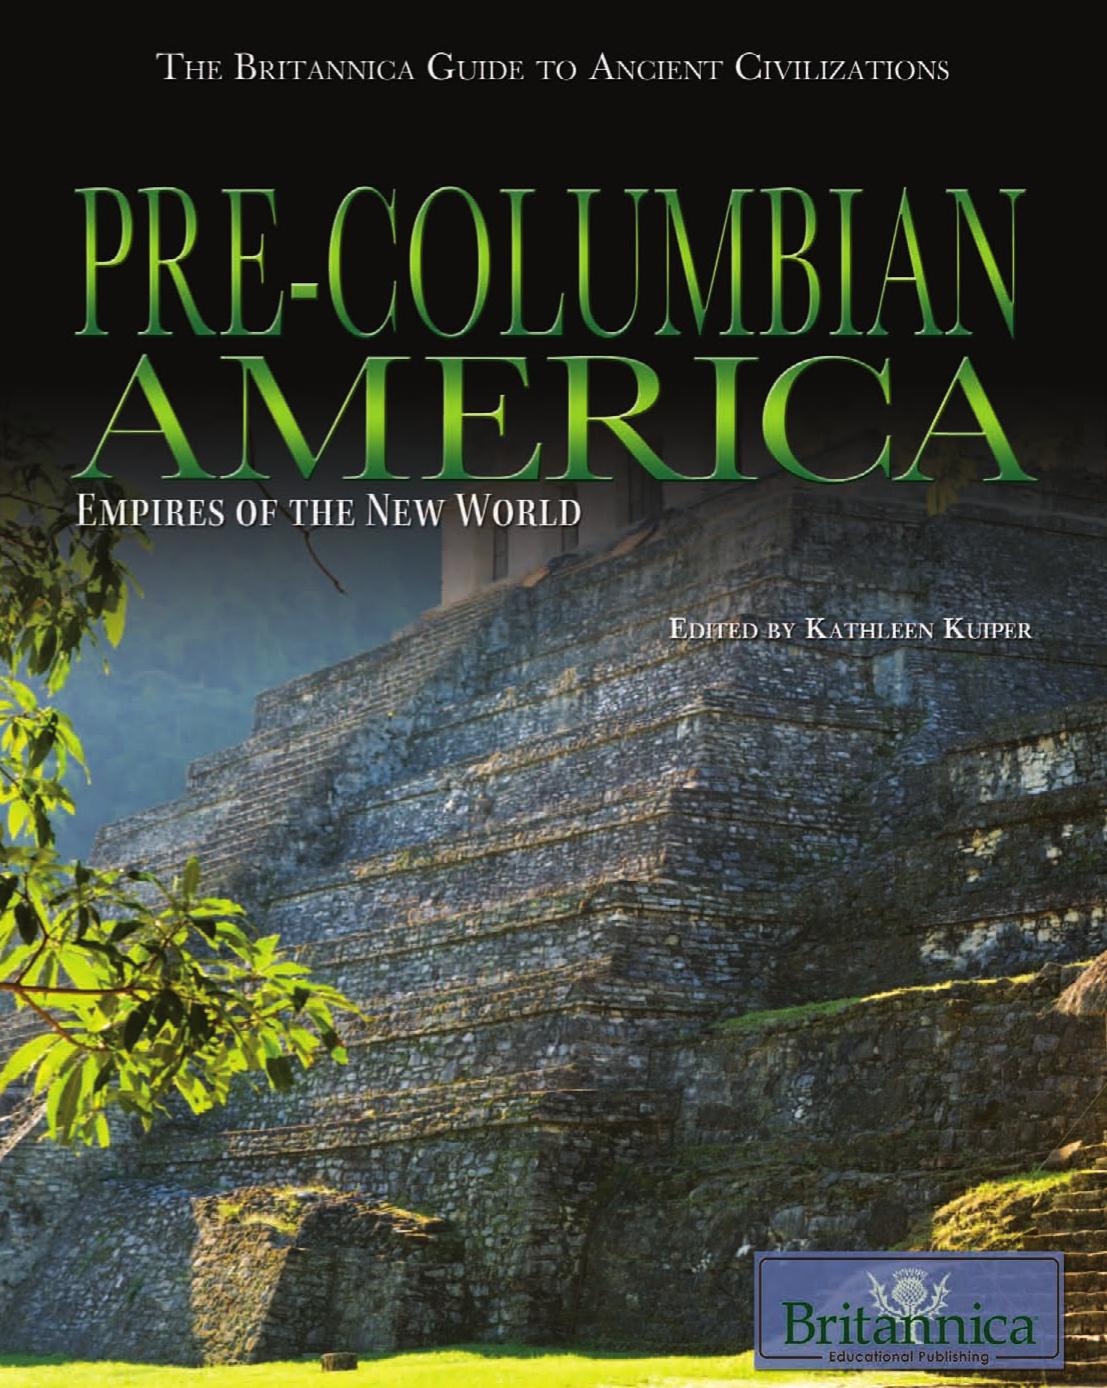 Pre-Columbian America: Empires of the New World